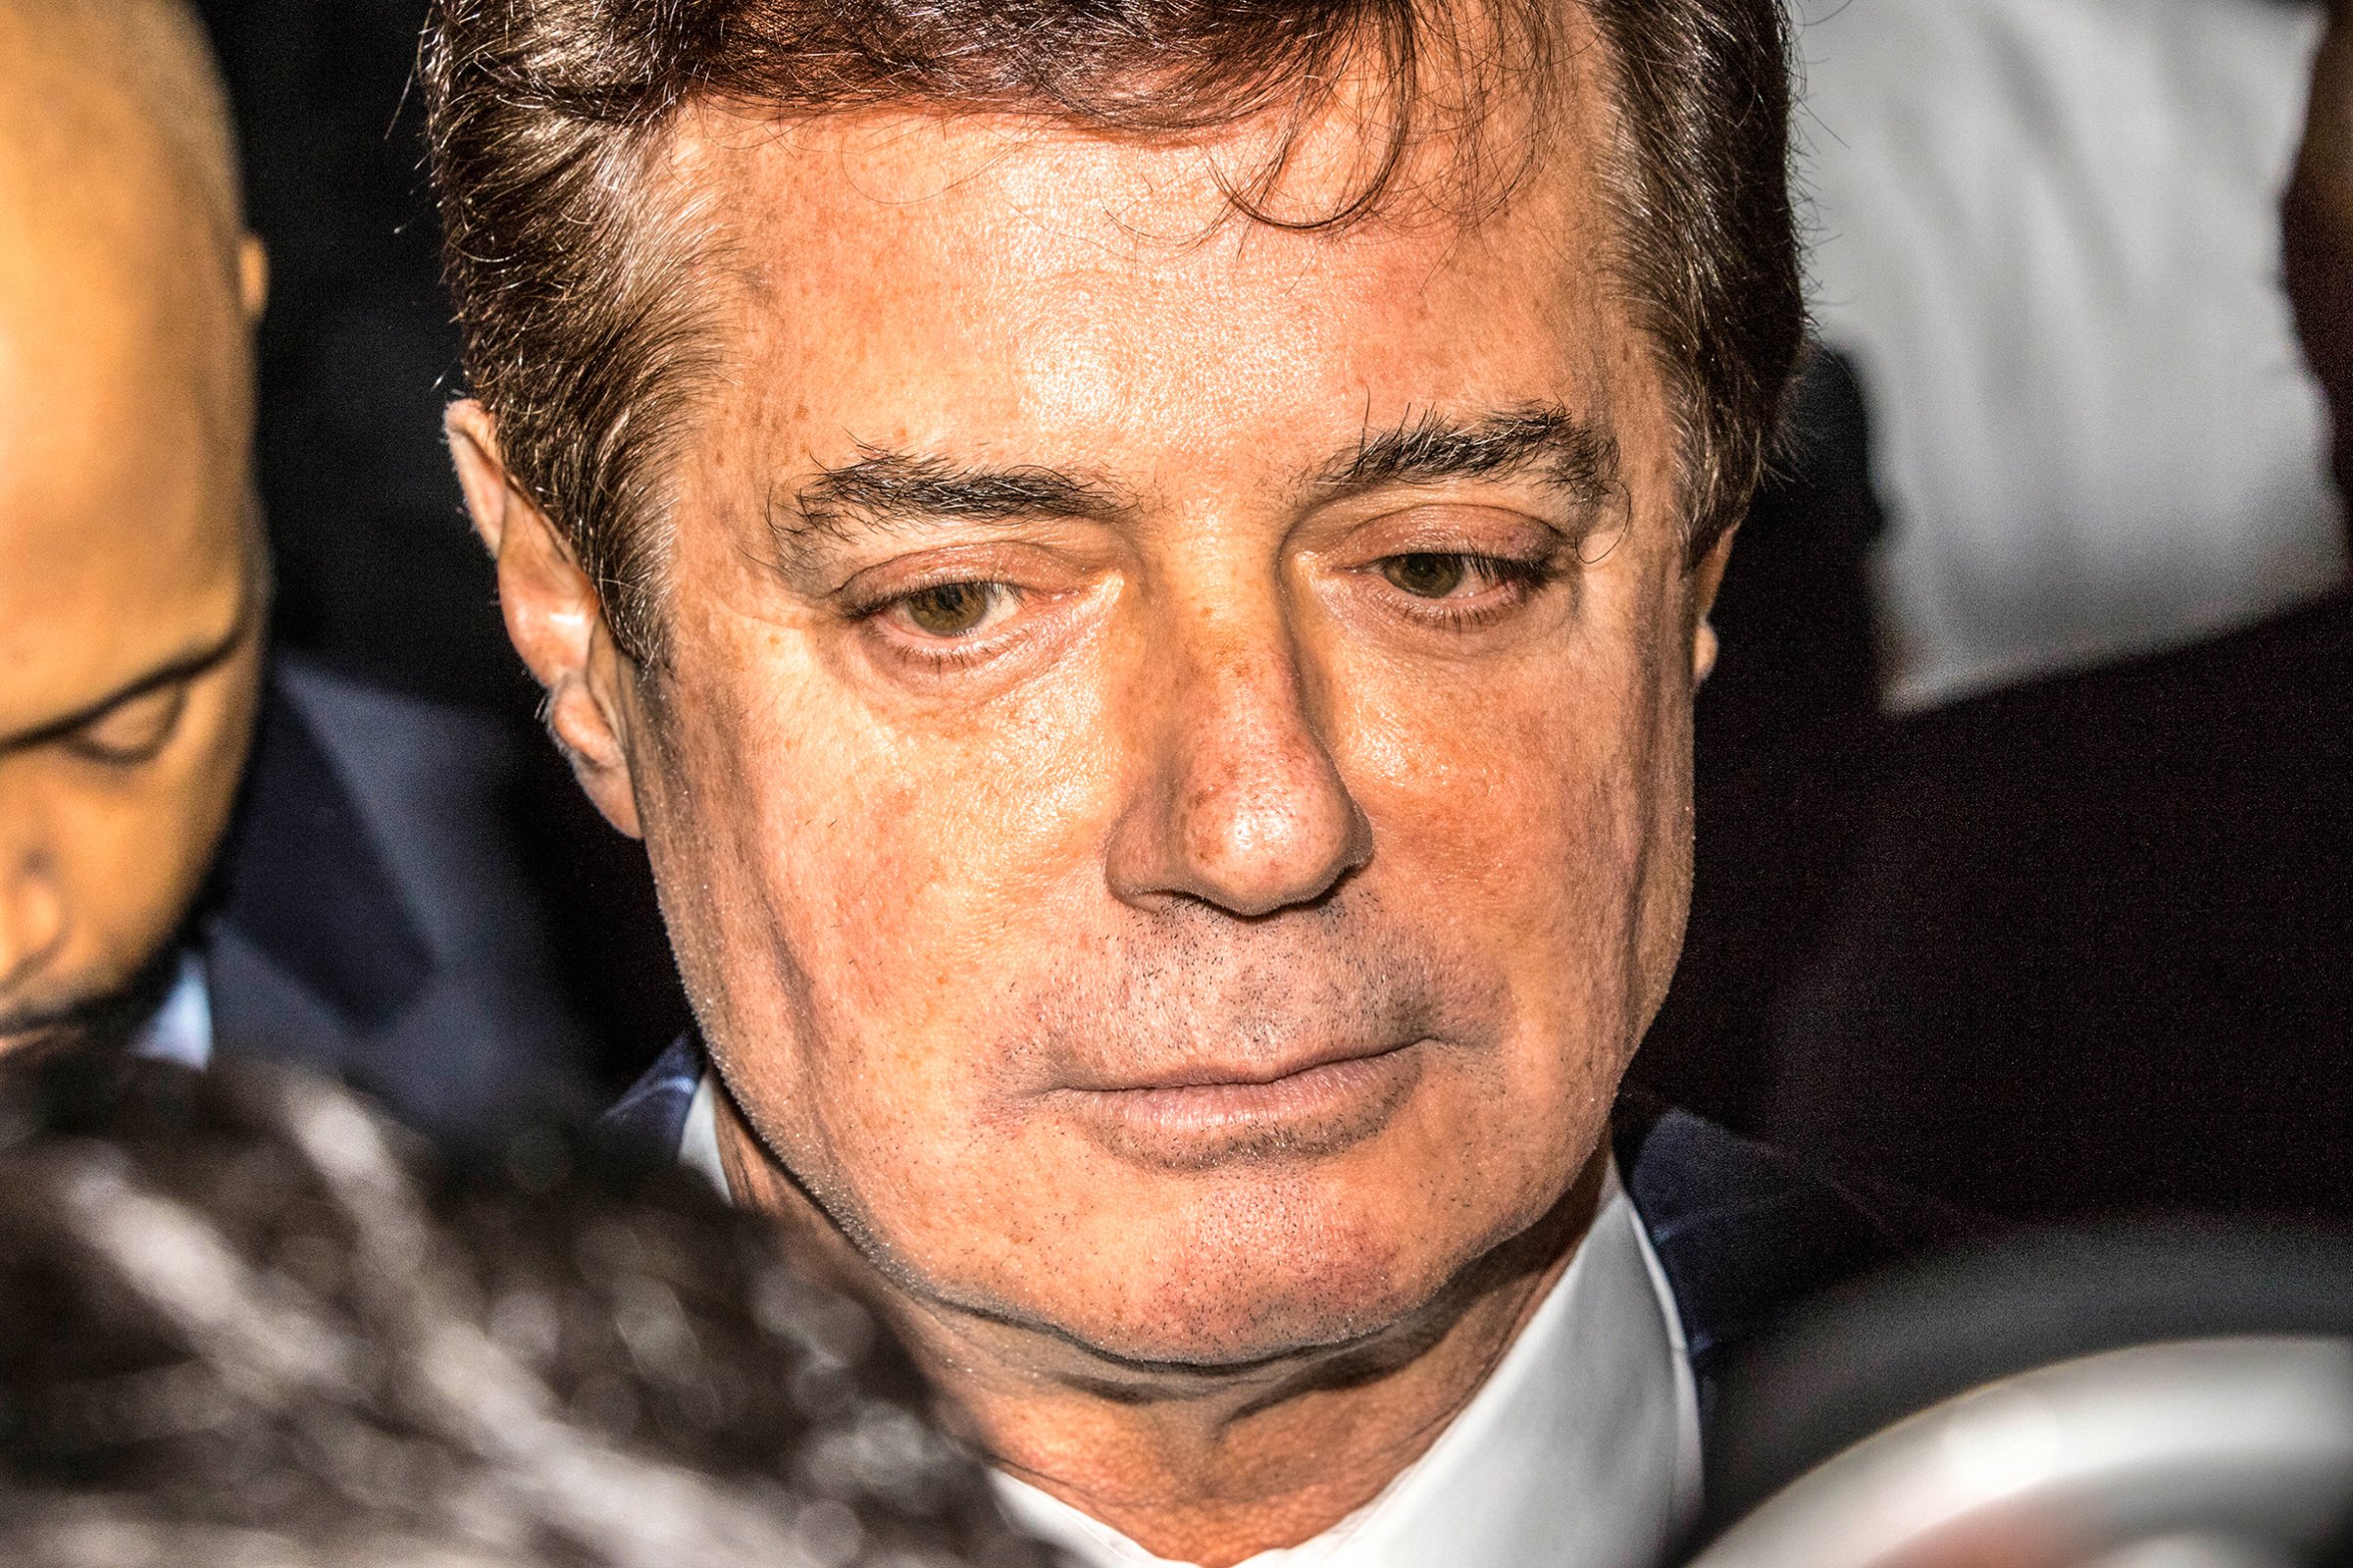 Manafort, the President’s former campaign chairman, was charged with tax fraud and money laundering